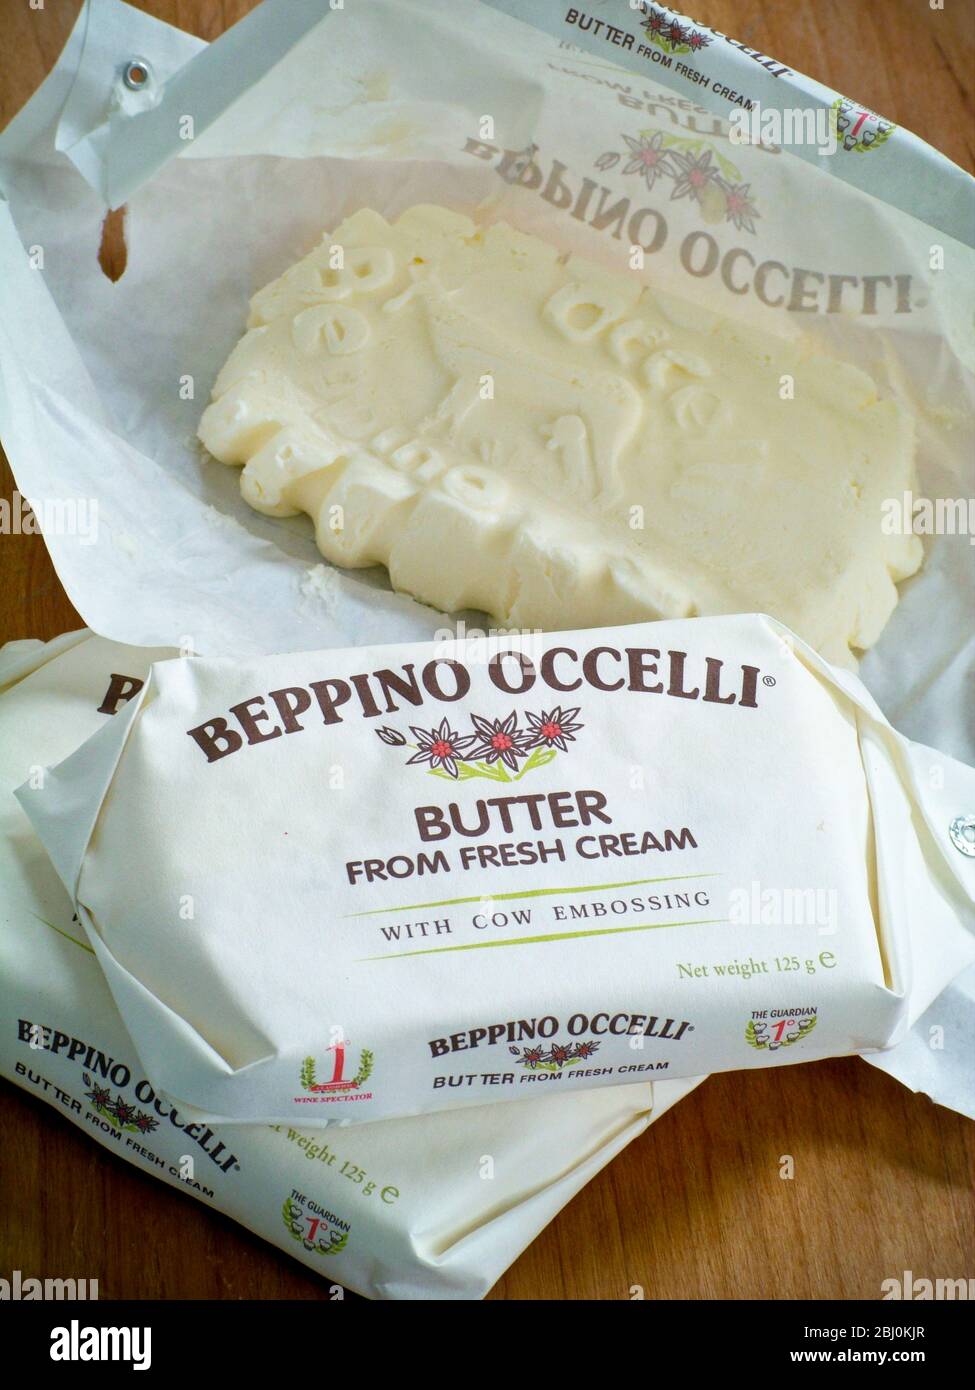 Beppino Occelli Italian butter shown in and out of its packaging and showing the relief patern of the embossed cow. - Stock Photo